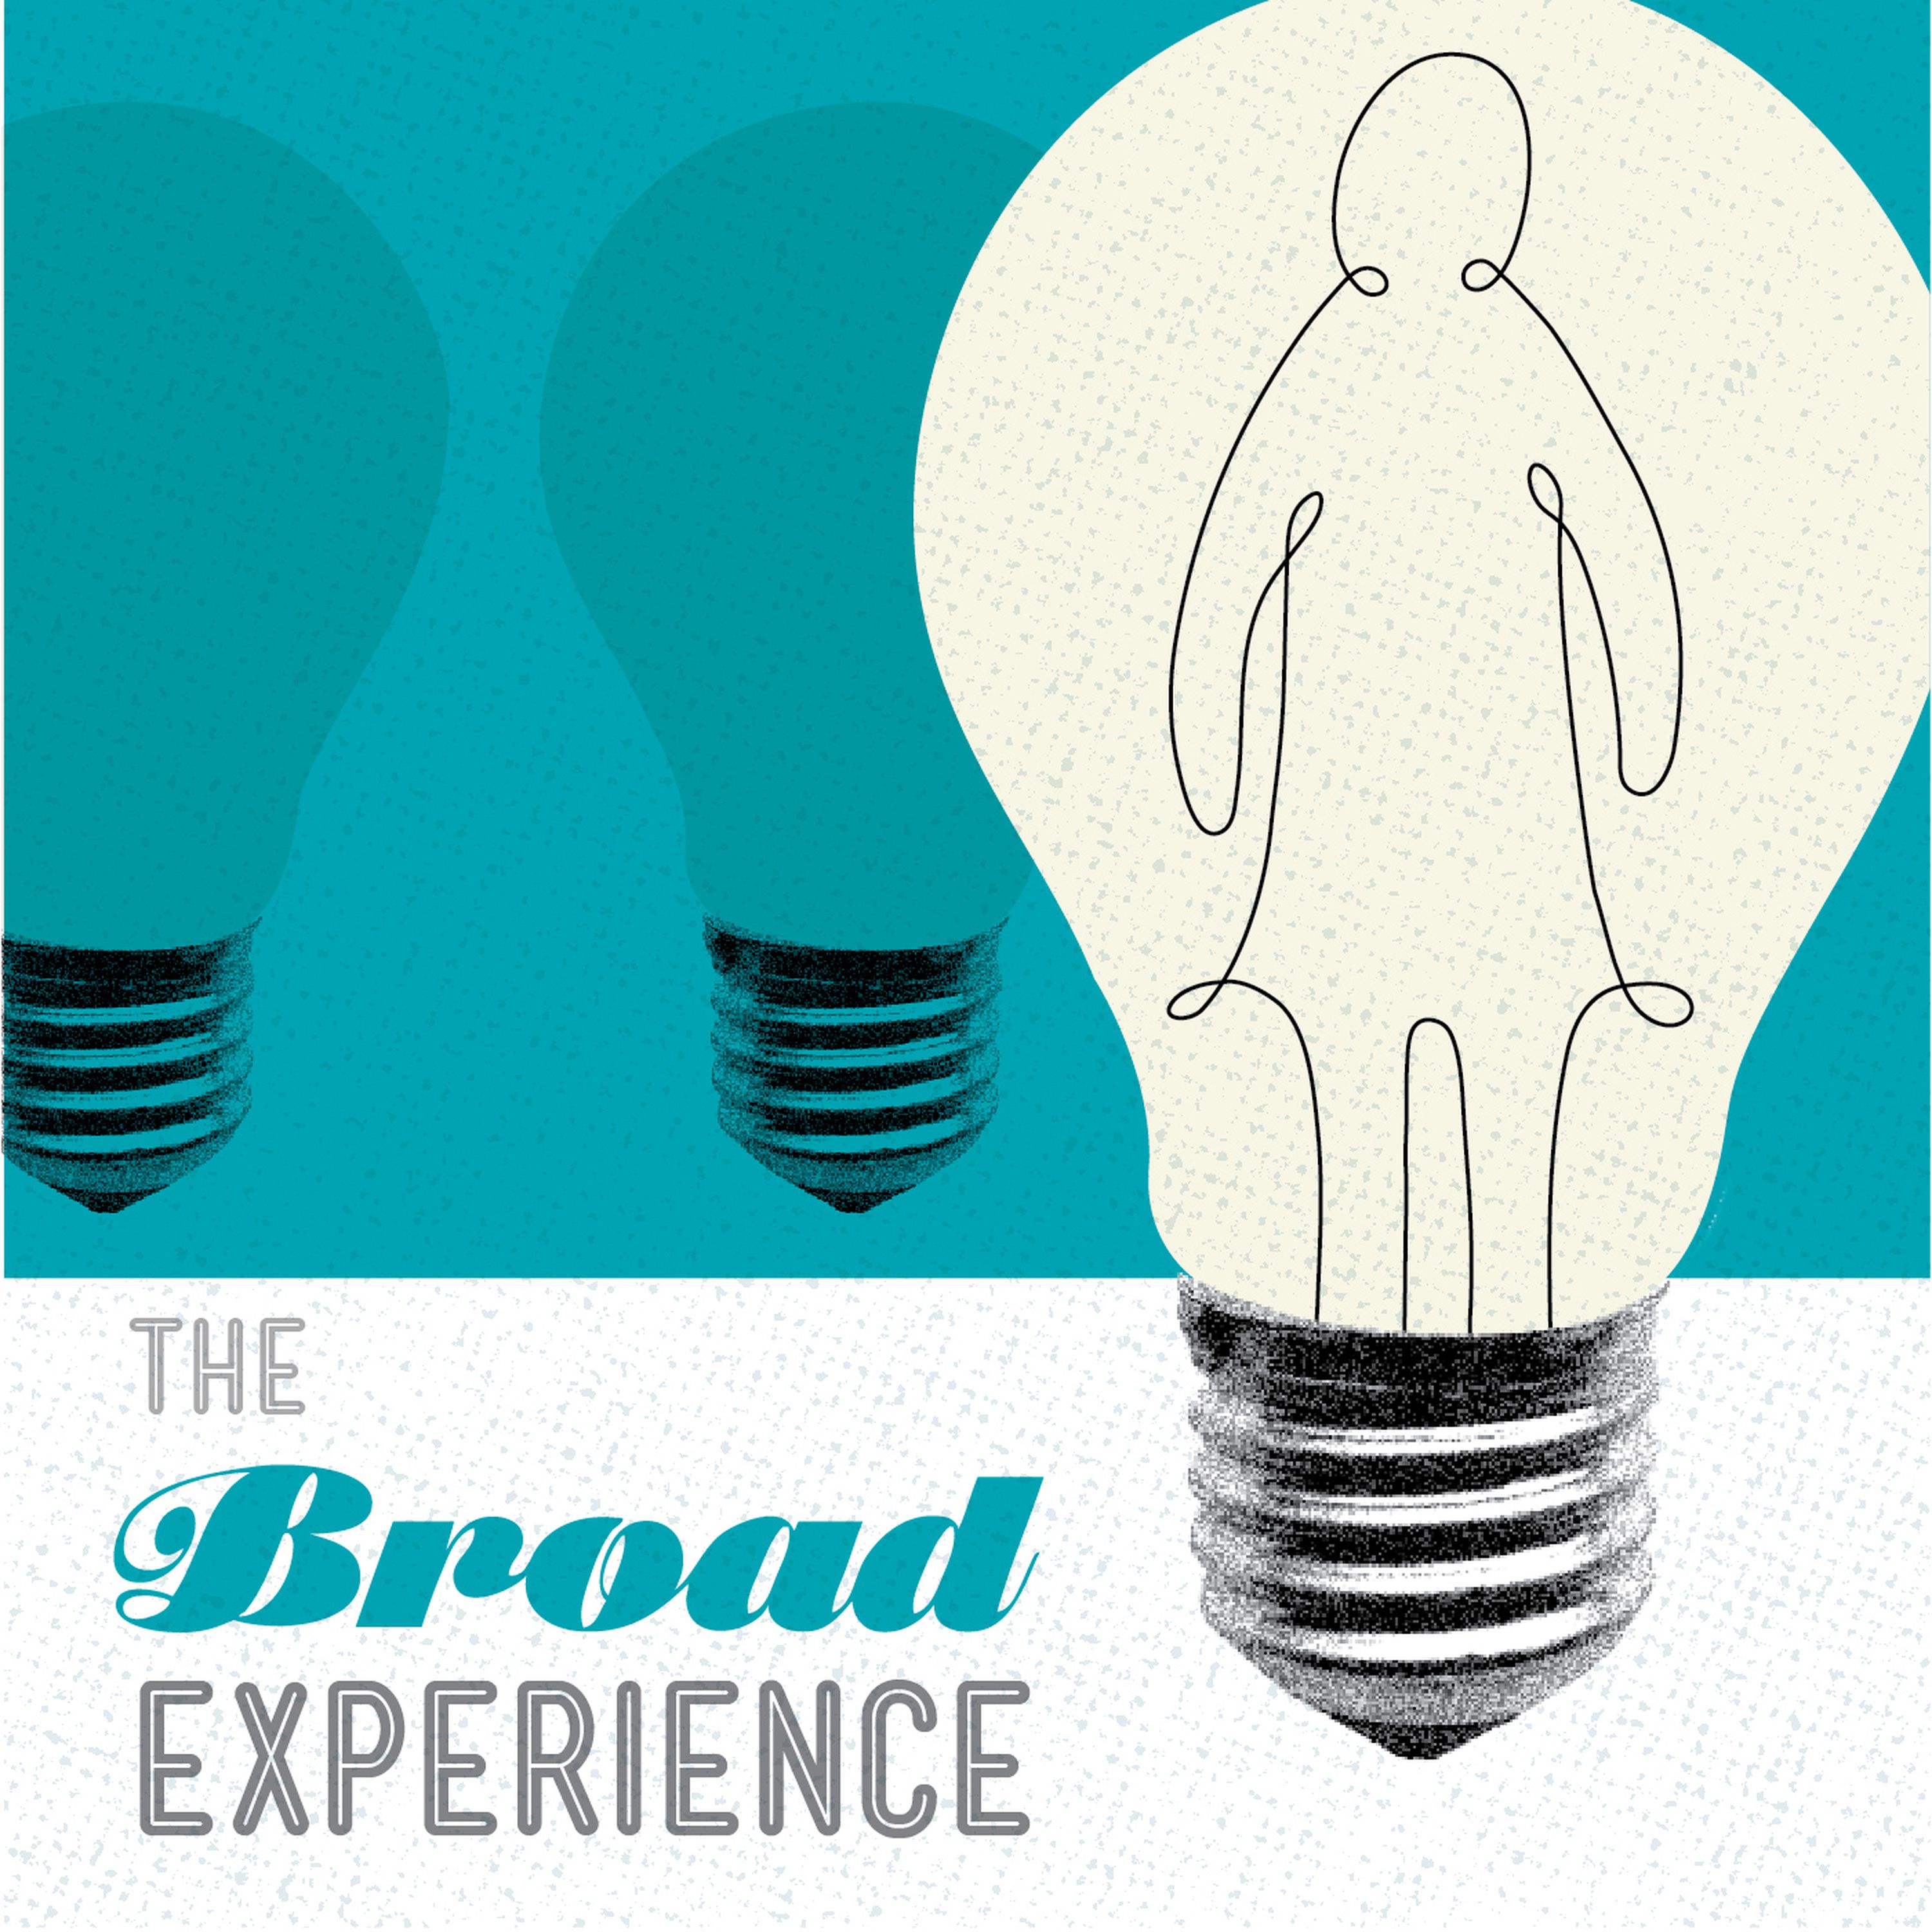 The Broad Experience 47: Authenticity vs. conformity